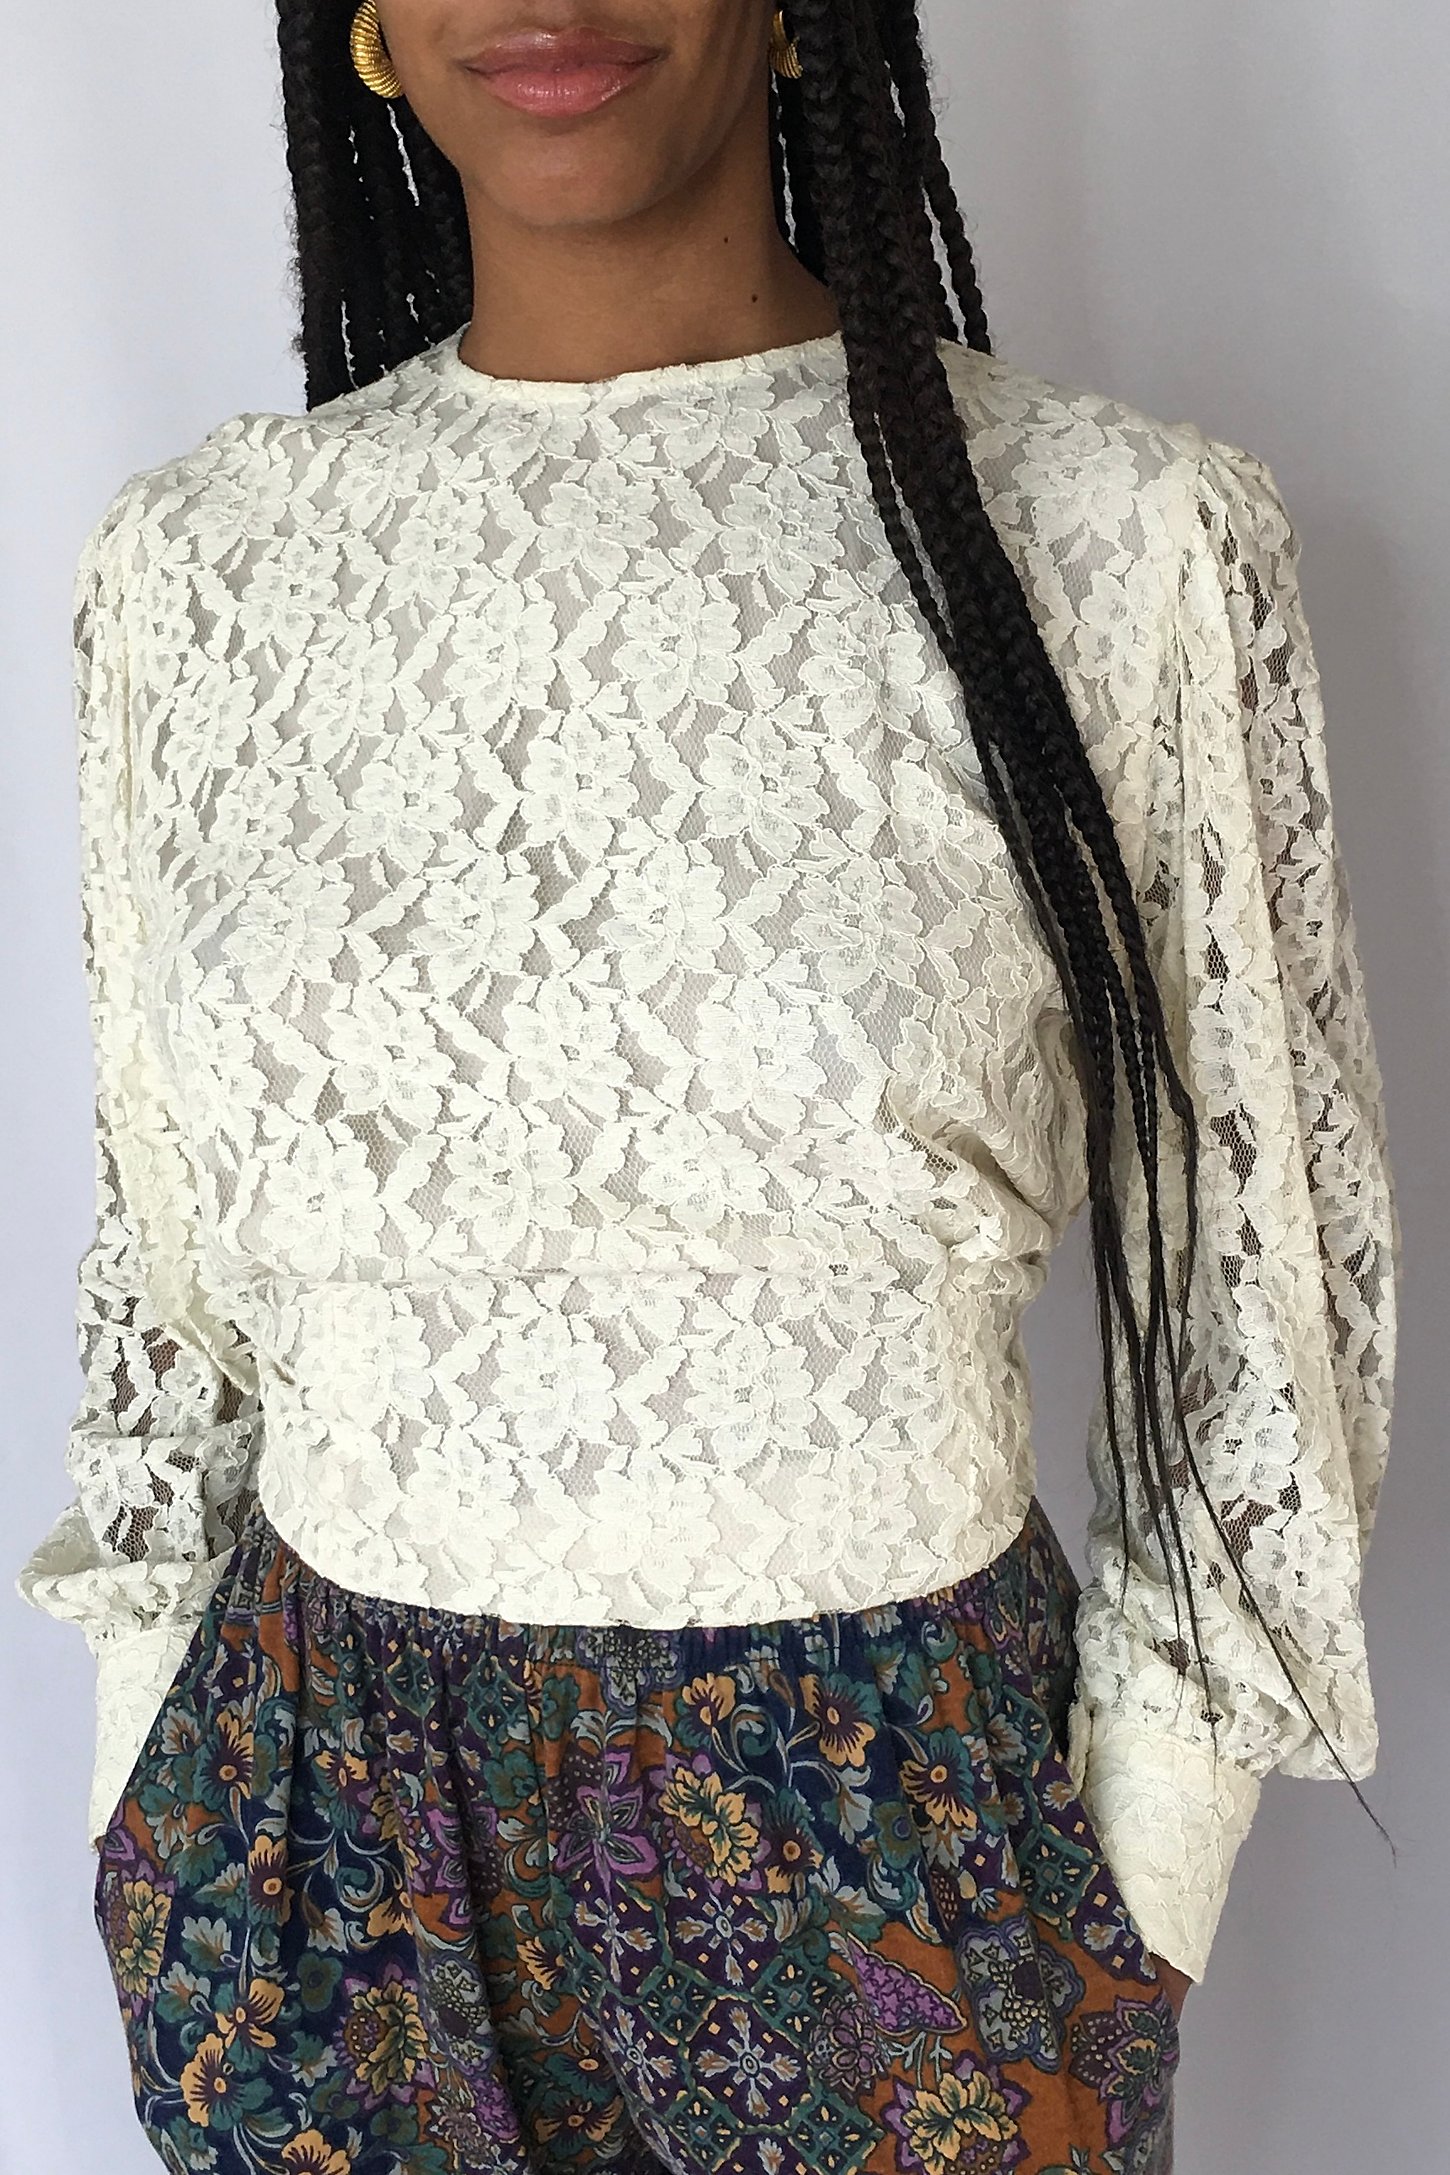 Vintage Evan Picone Lace Blouse Selected By Ankh By Racquel Vintage